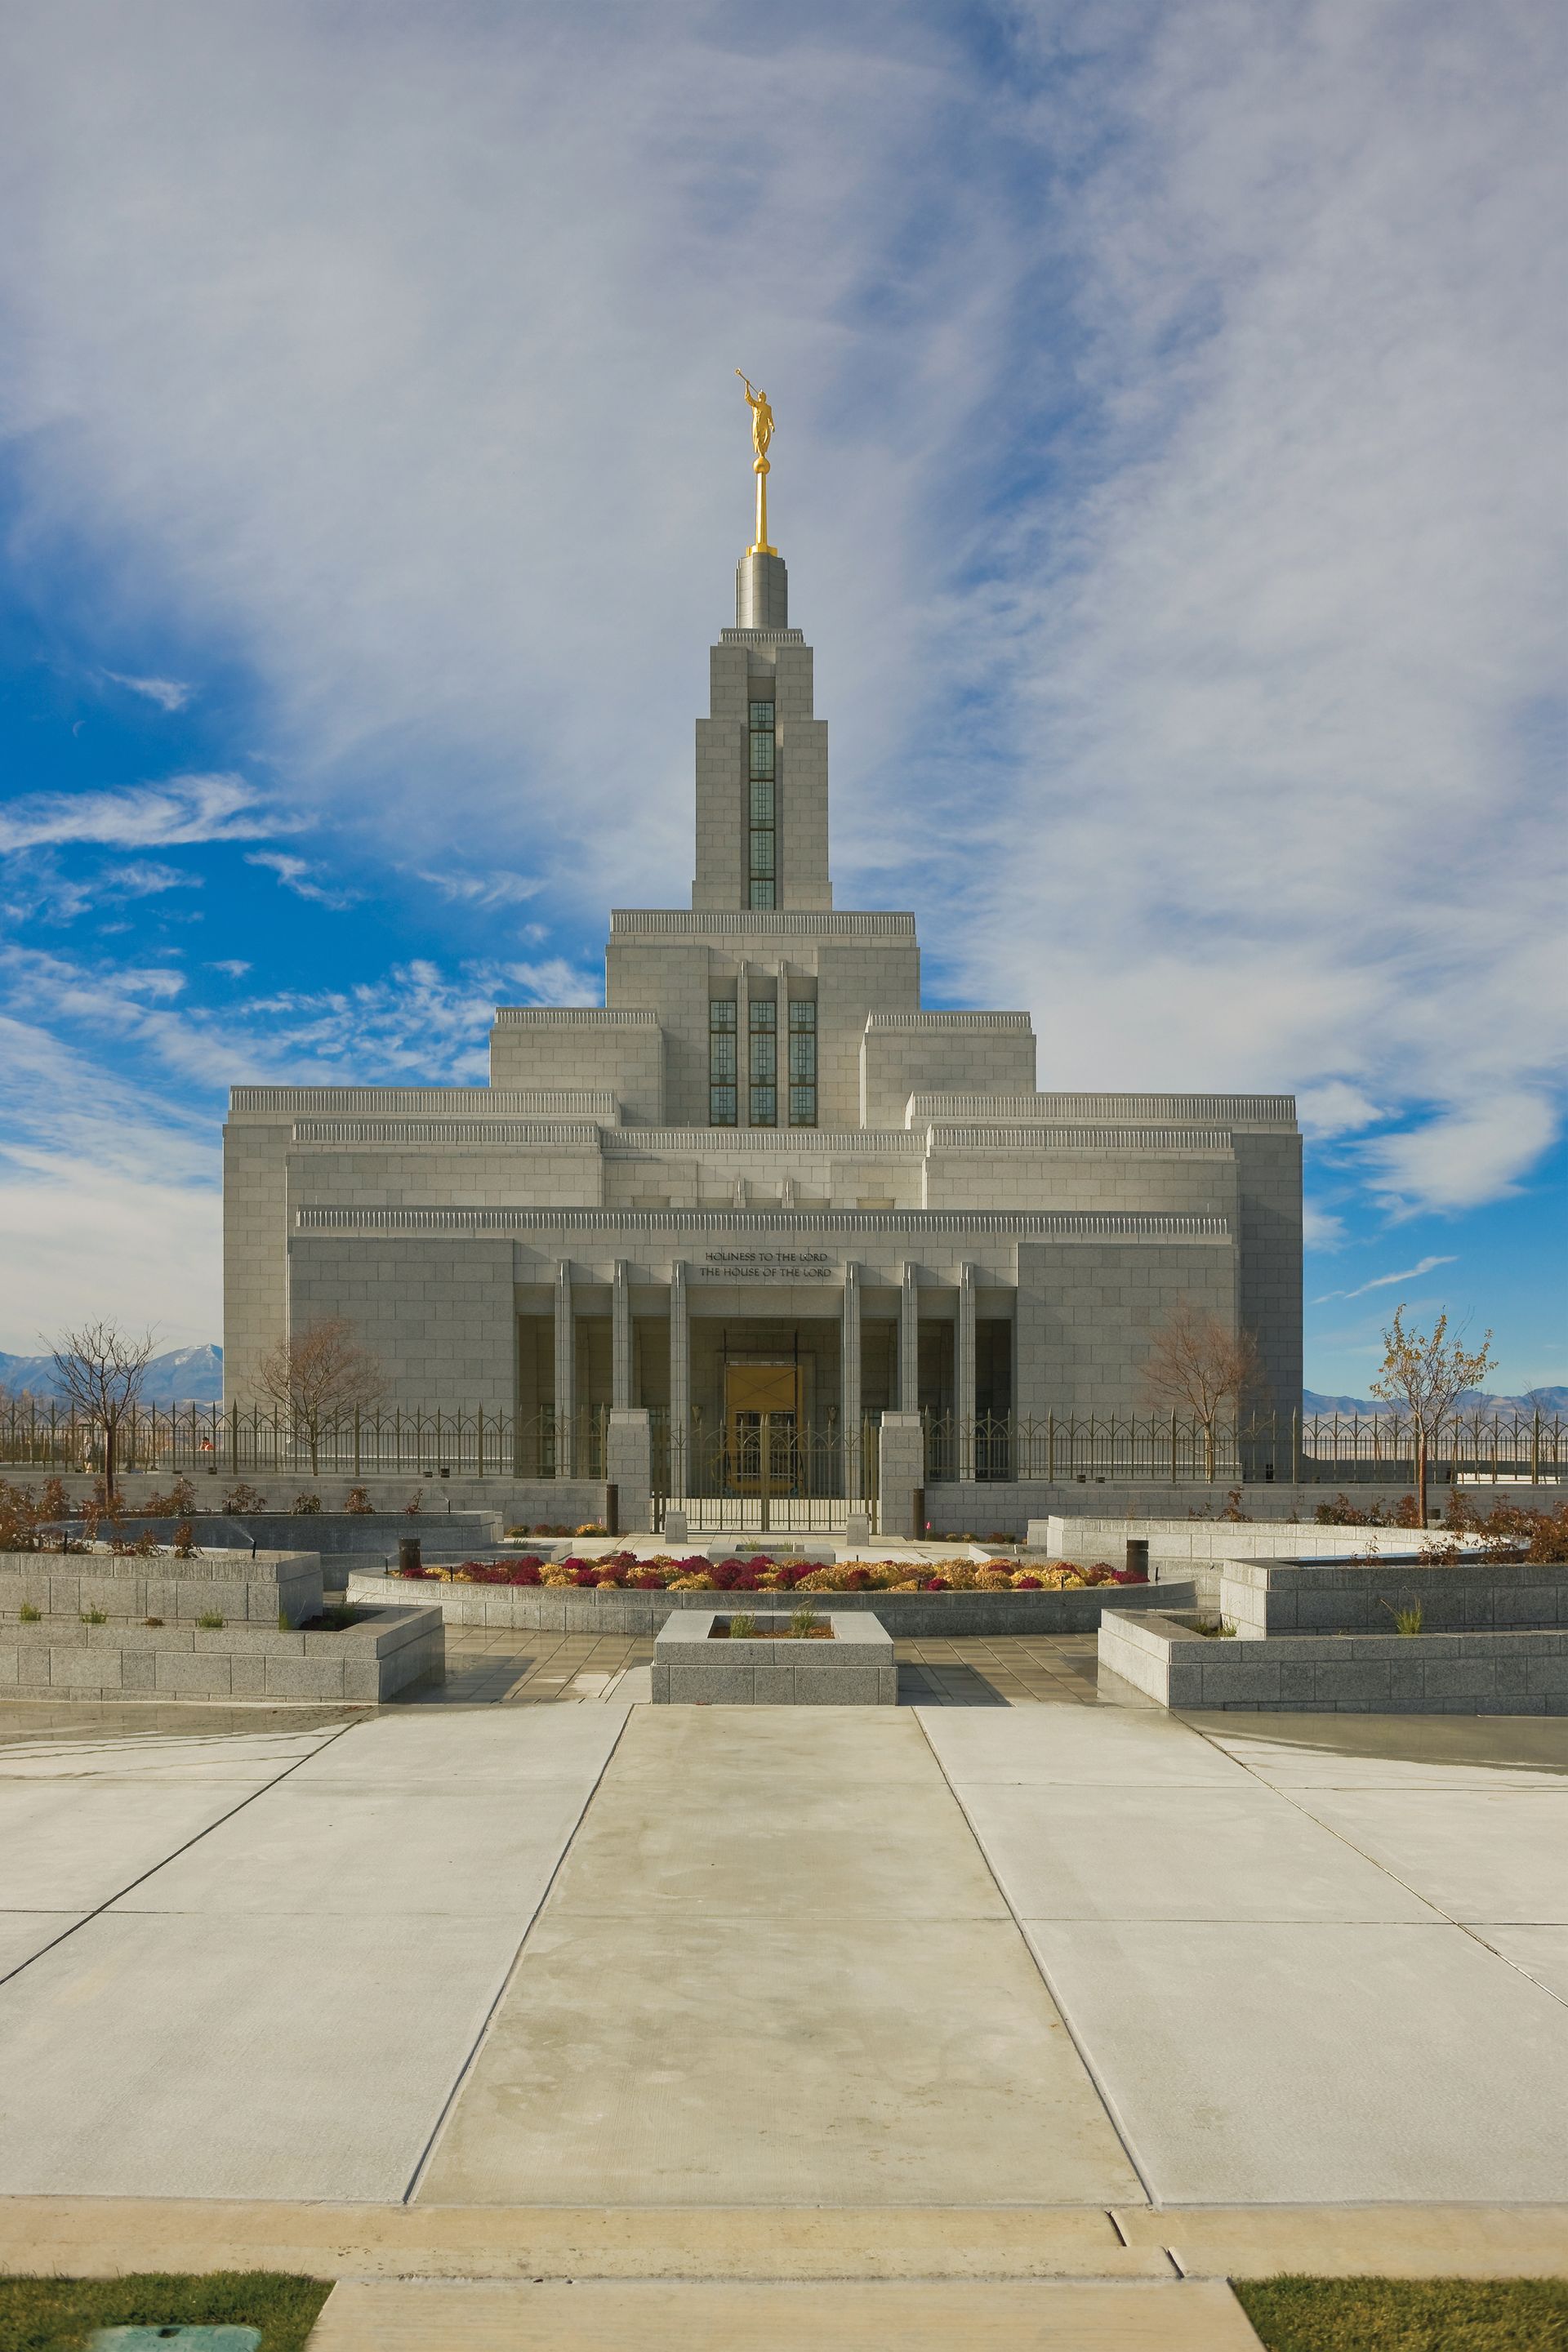 A portrait view of the entrance to the Draper Utah Temple.